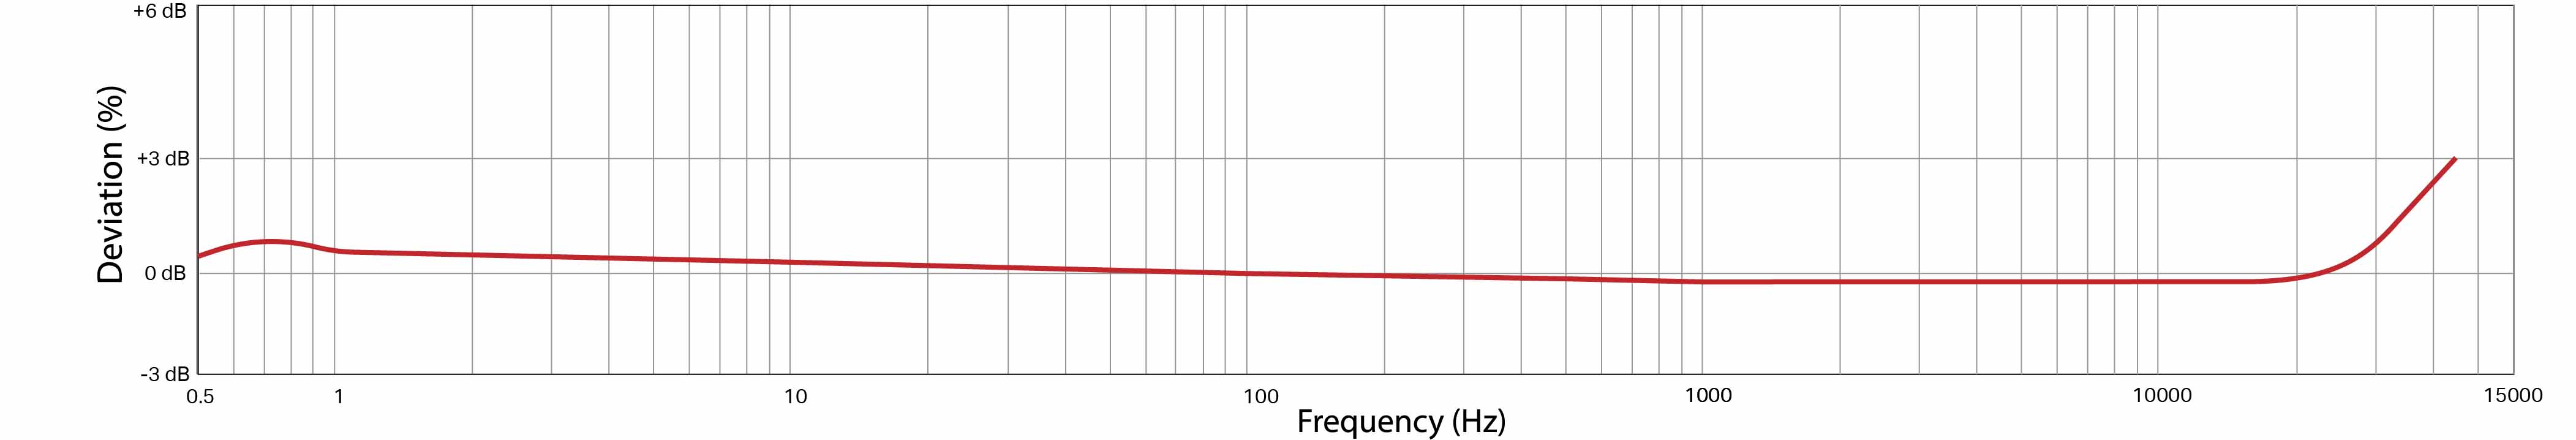 A line graph showing the frequency resopnse of a CTC AC102 condition monitoring sensor.